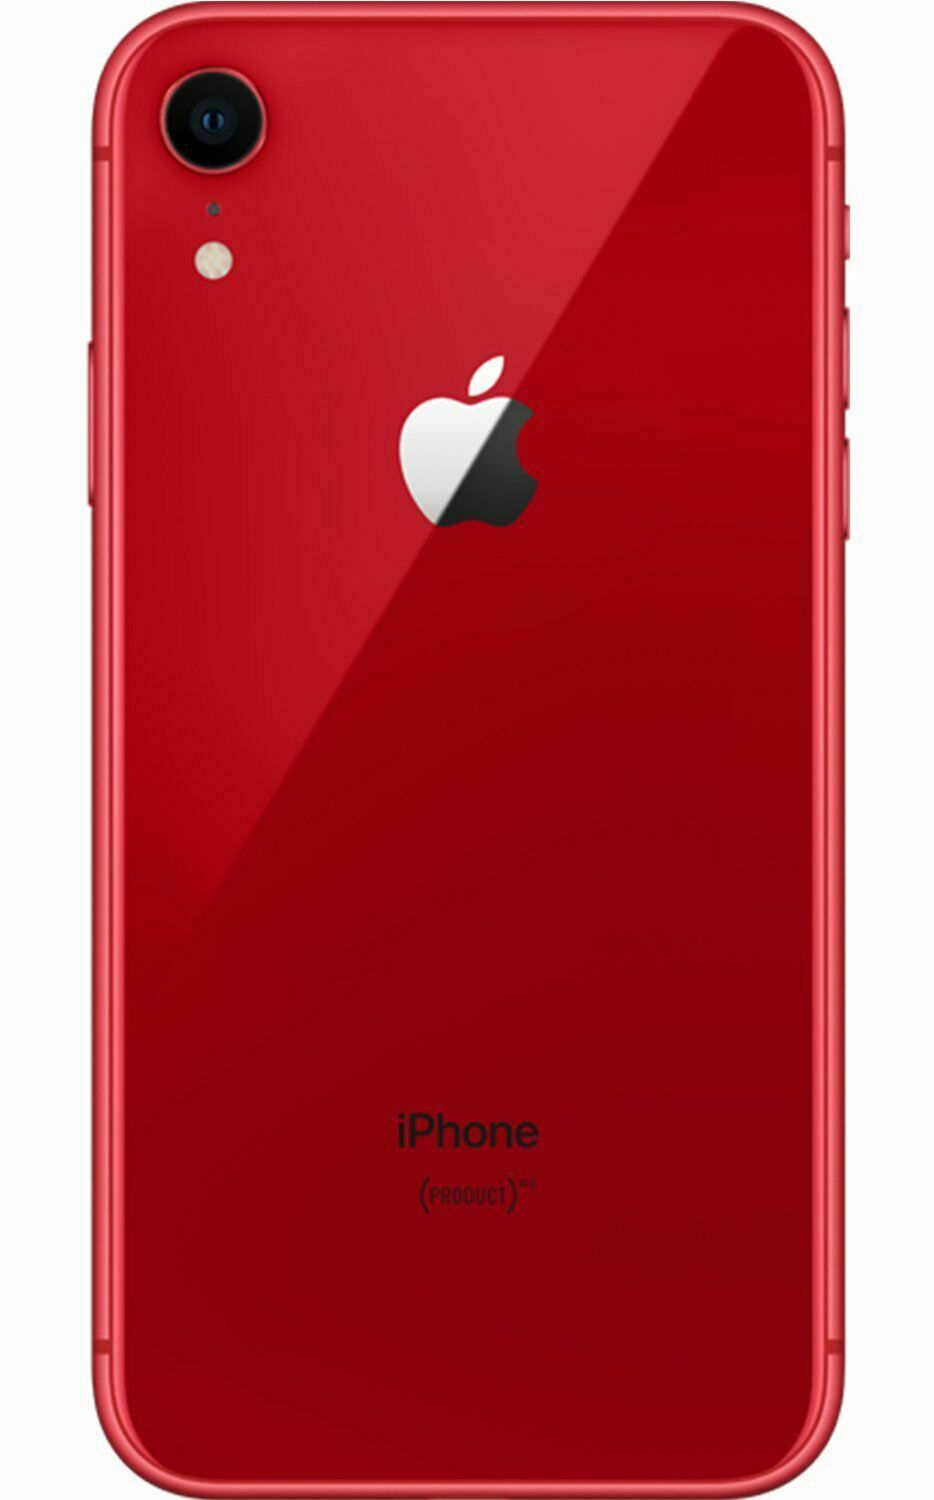 iPhone XR - 128GB, Unlocked – The Apple Xchange - Preowned Apple 